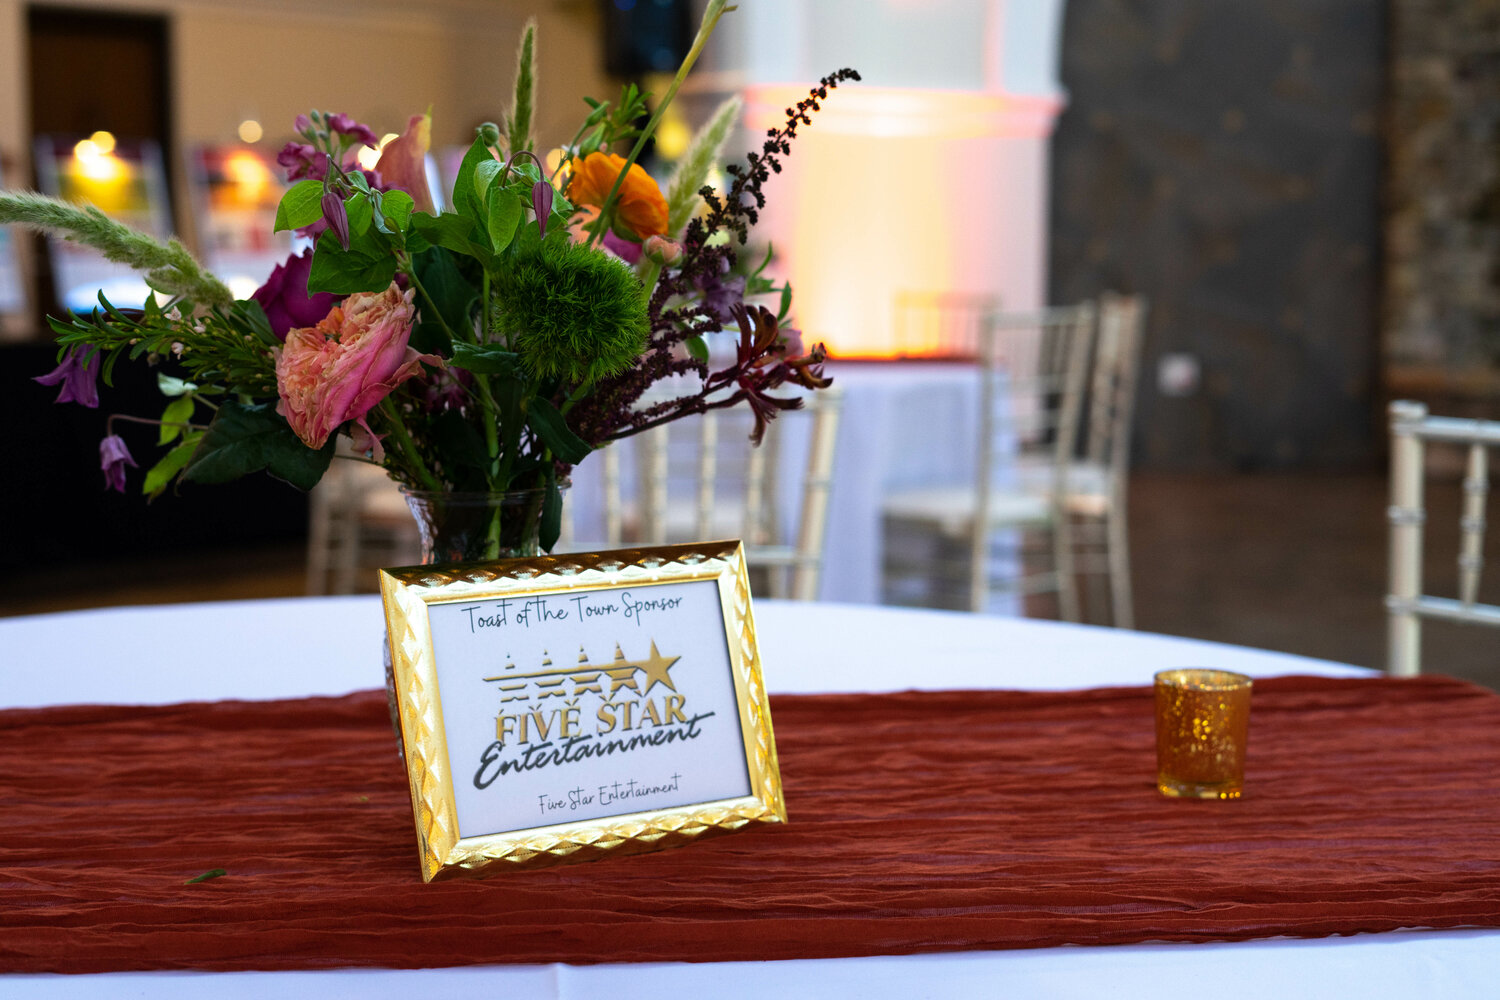 Toast of the Town, hosted by the Care Clinic, was held on May 4 at Cape Fear Botanical Garden.